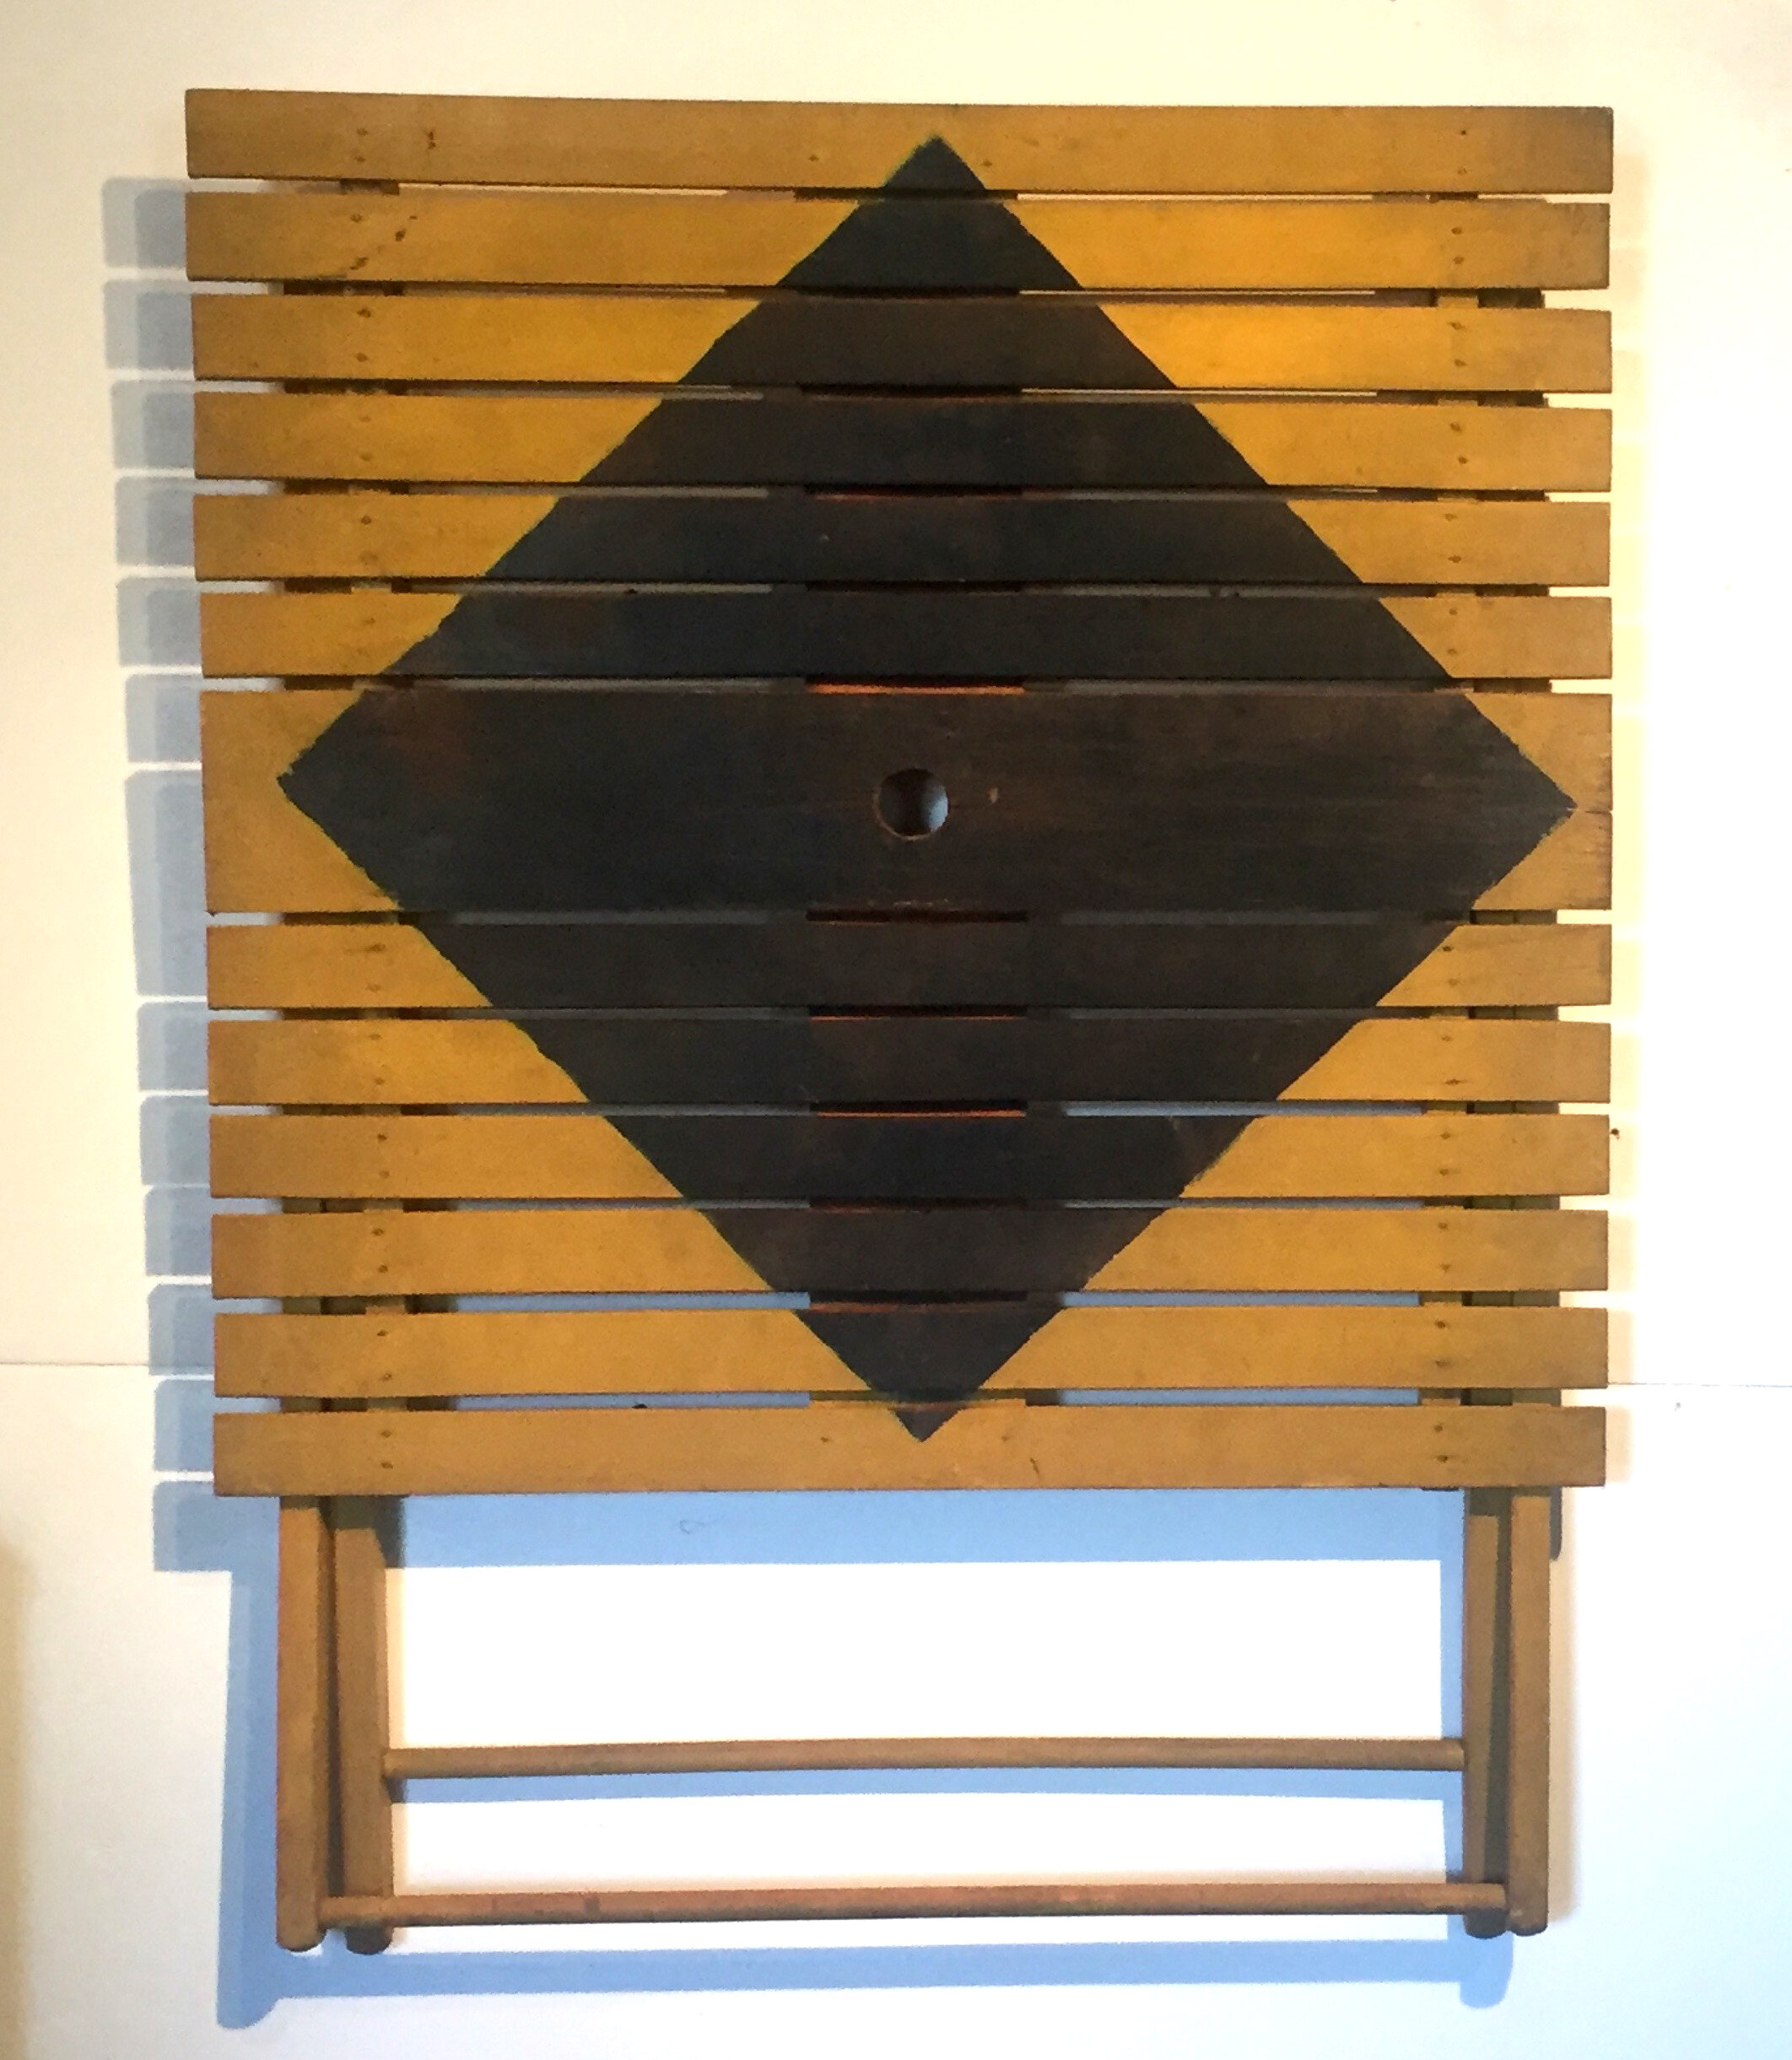   Painted wood, 28" x 28" x 29"h, American, mid-century.  